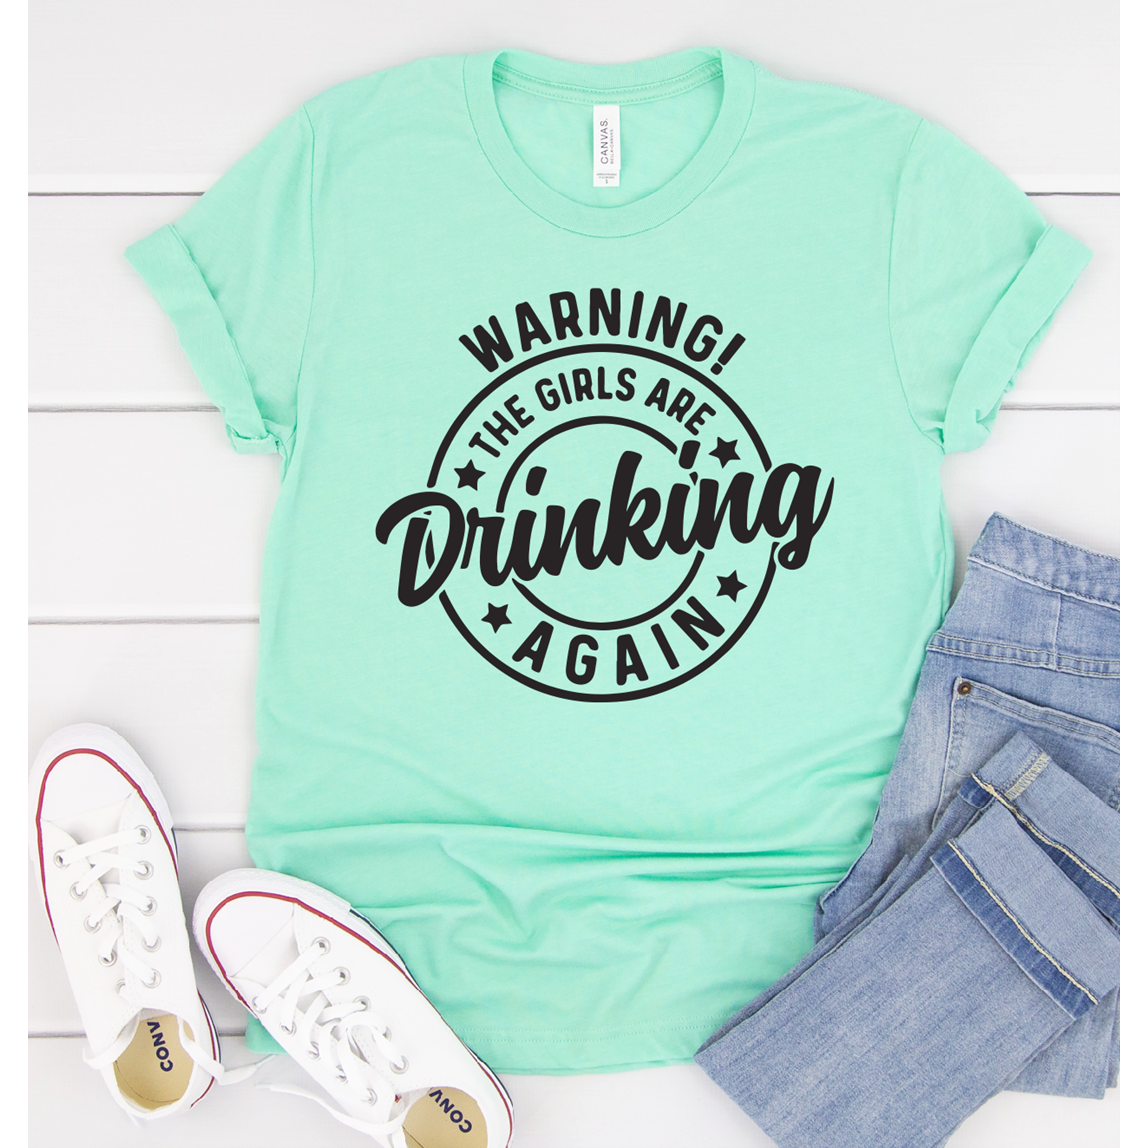 The Girls are Drinking again Warning Tee